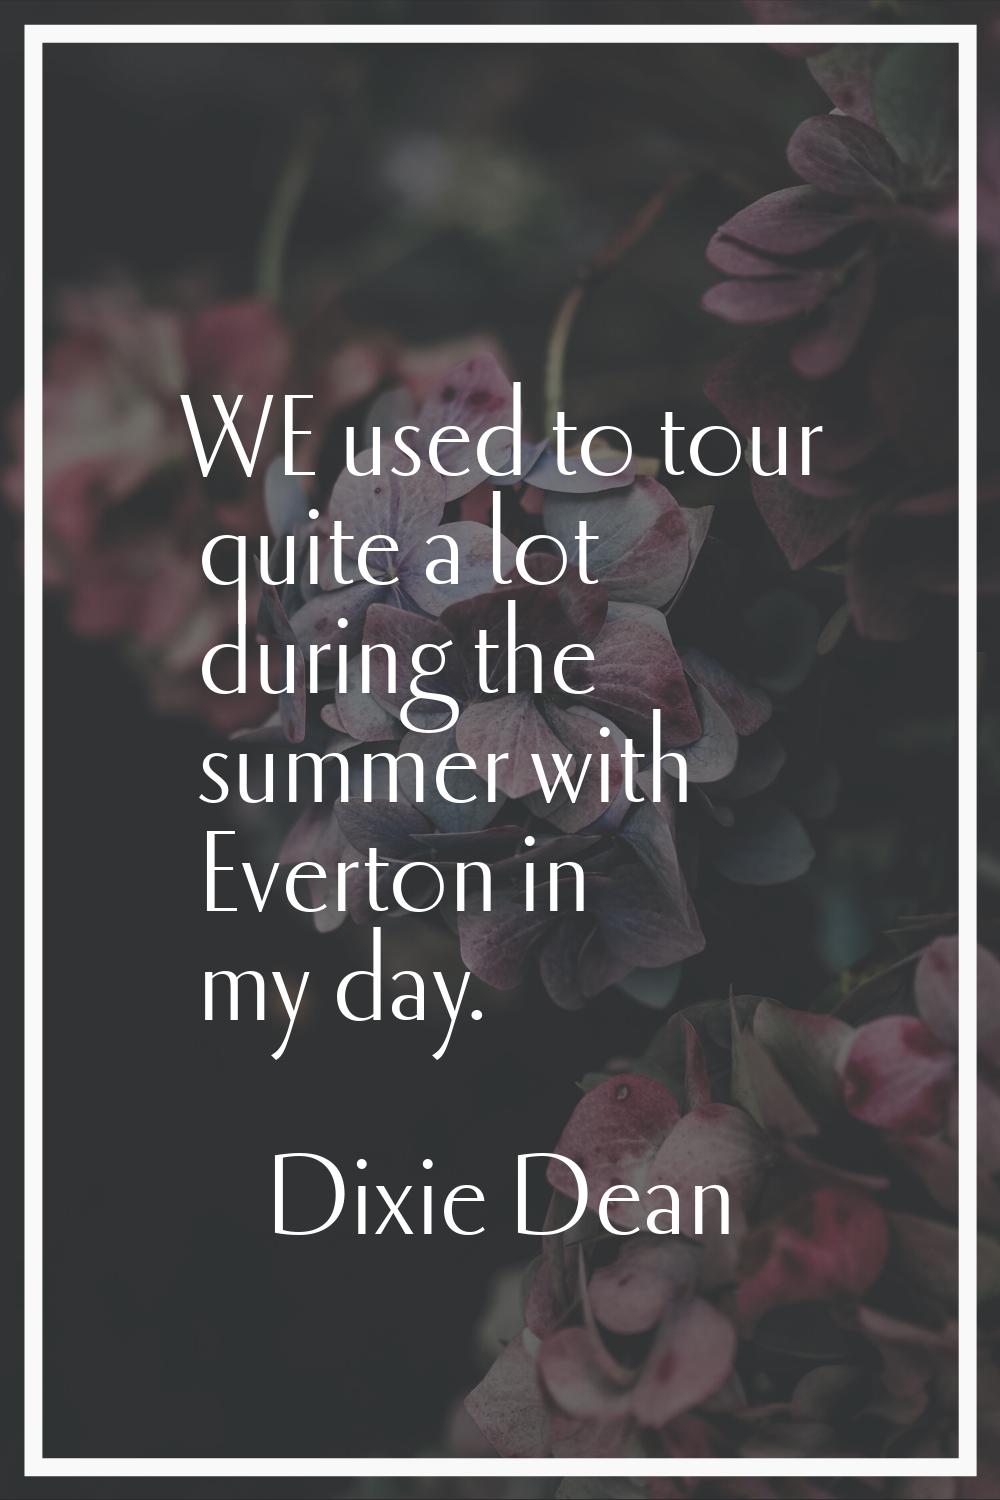 WE used to tour quite a lot during the summer with Everton in my day.